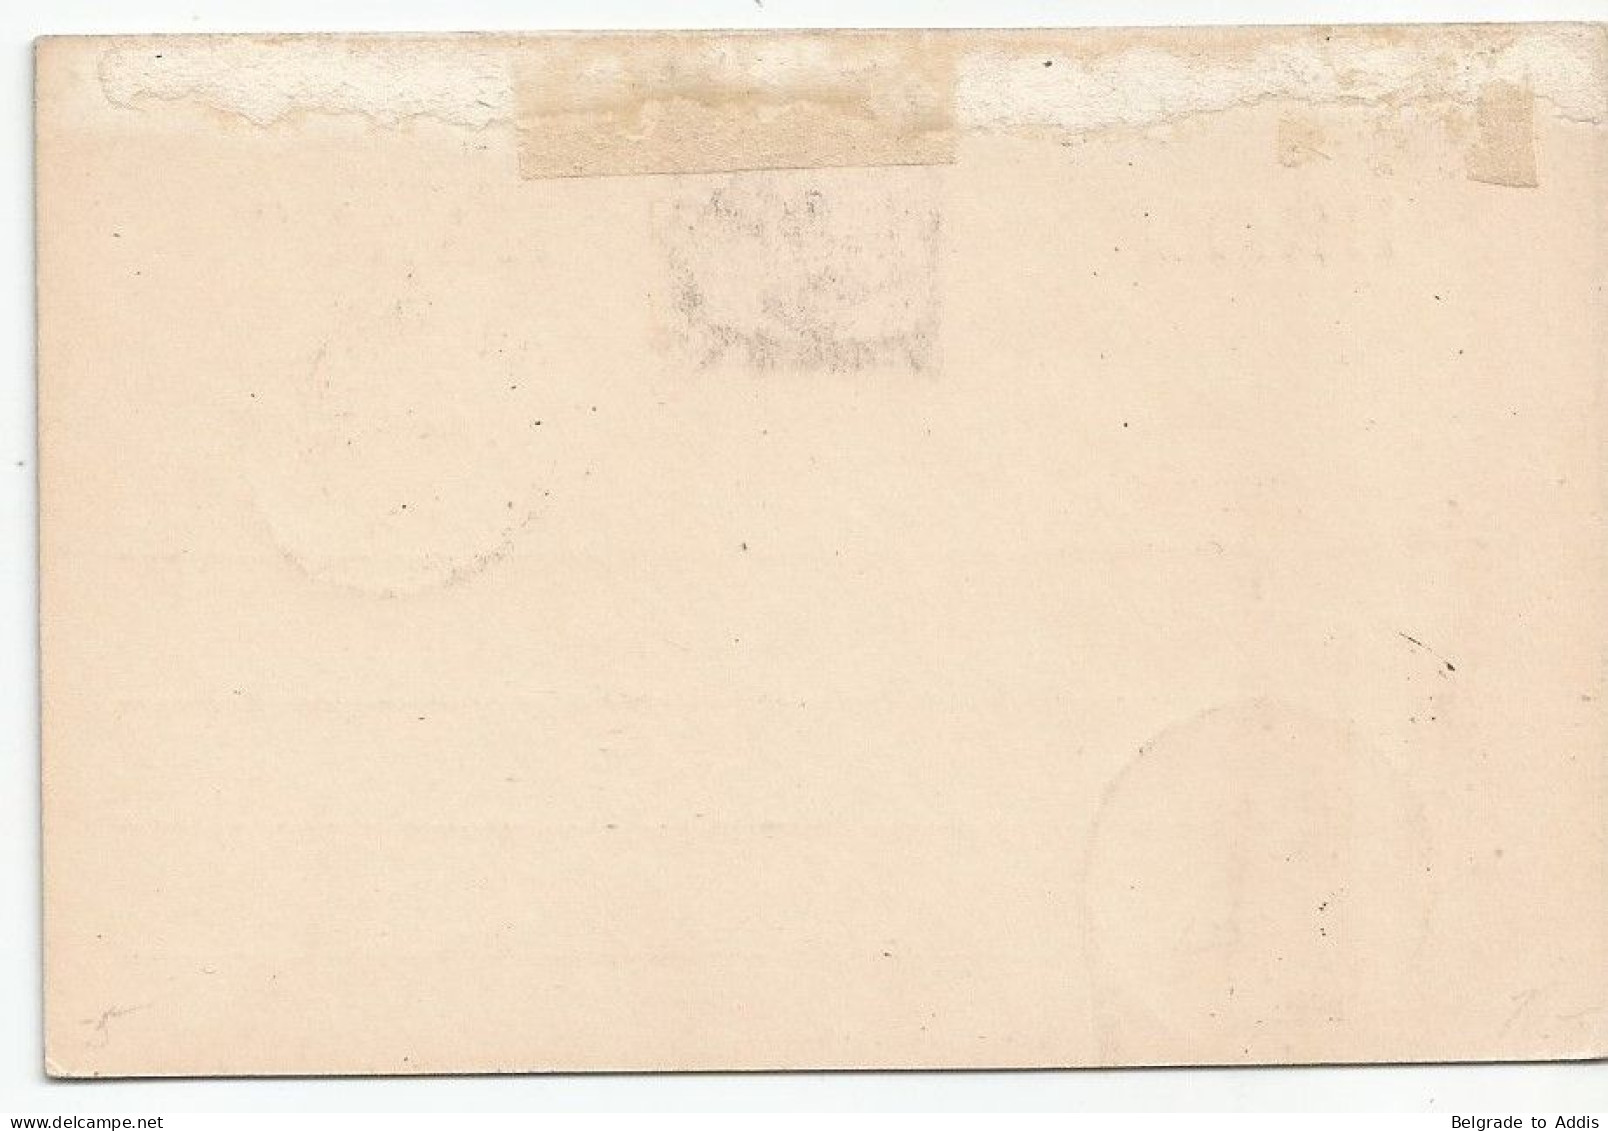 South Africa Great Britain ORC OFS Orange River Colony / Free State PostCard Postal Stationery 1892 Sent To Germany - État Libre D'Orange (1868-1909)